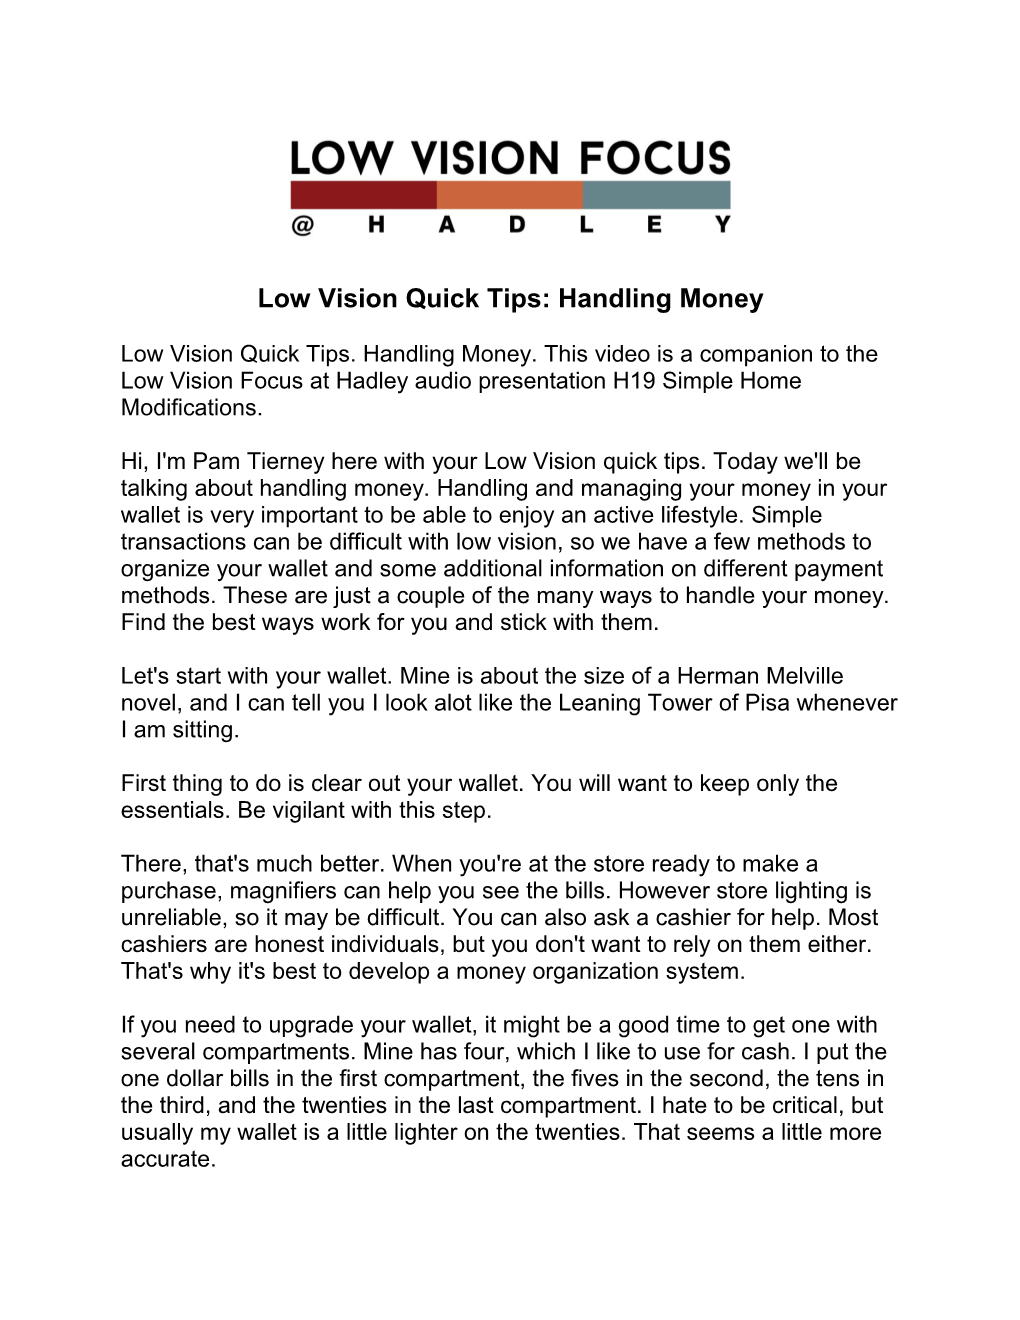 Low Vision Quick Tips: Handling Money